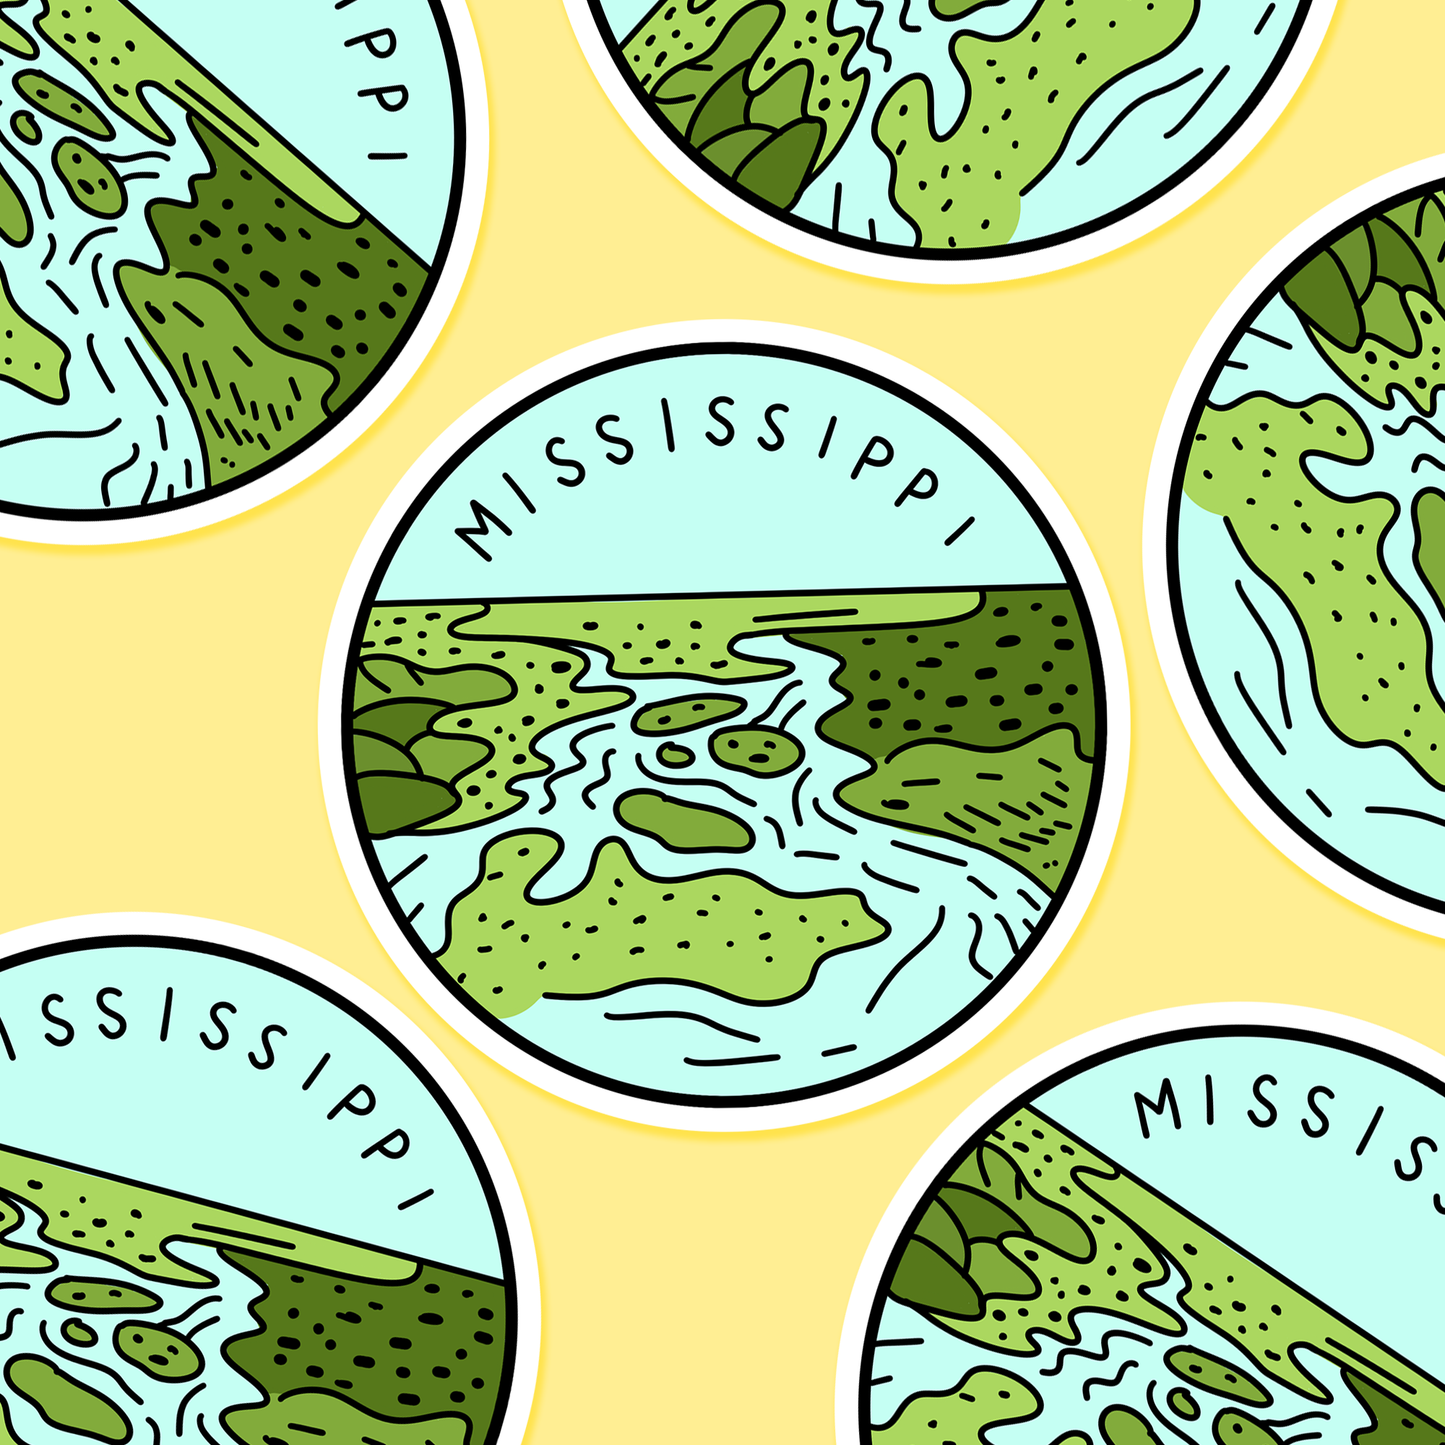 Mississippi Illustrated US State 3 x 3 in - Travel Sticker